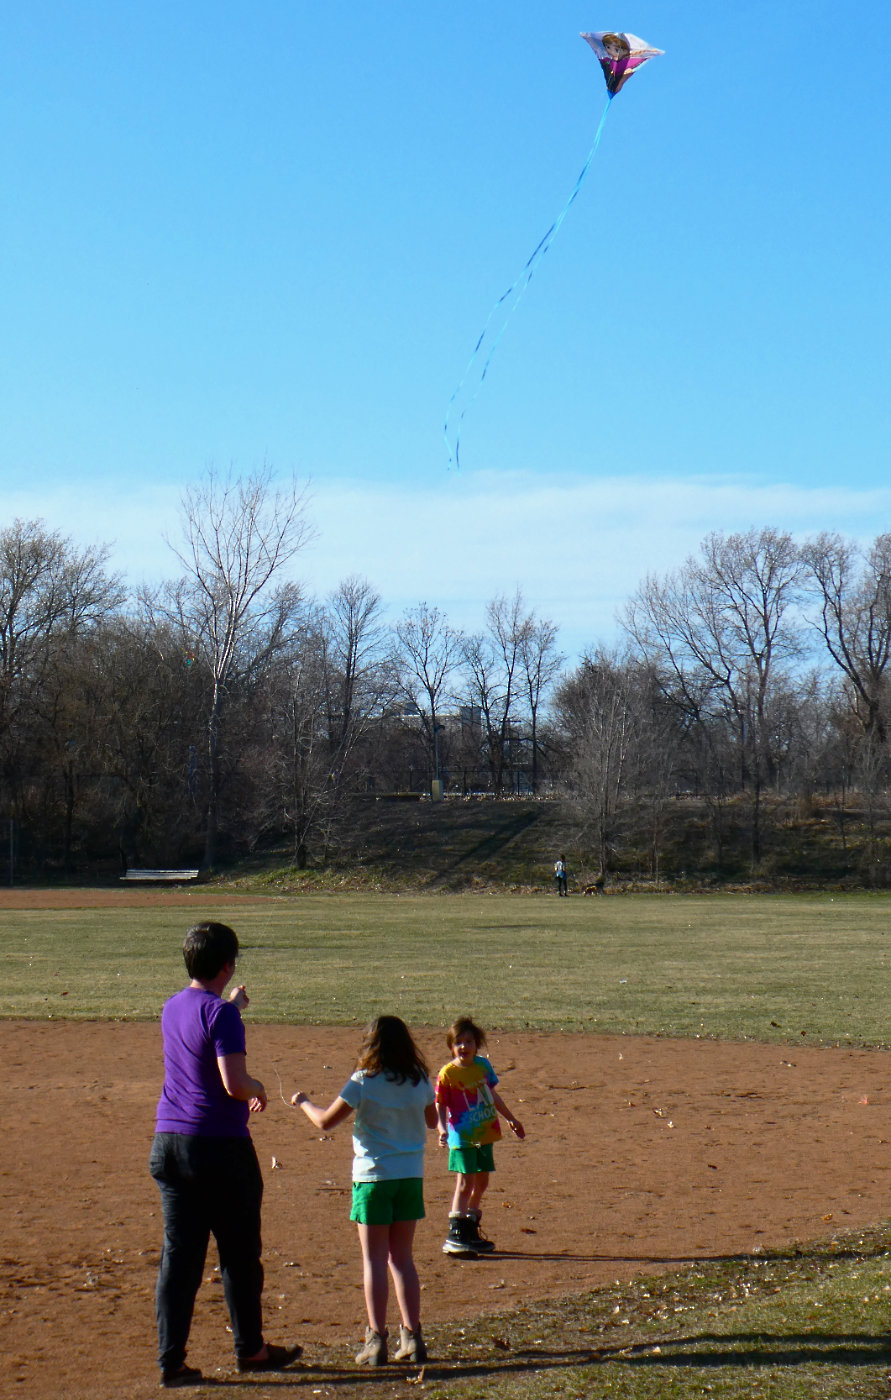 woman and two young children flying a kite on a bare baseball diamond with field and trees in background on a sunny day with deep blue sky